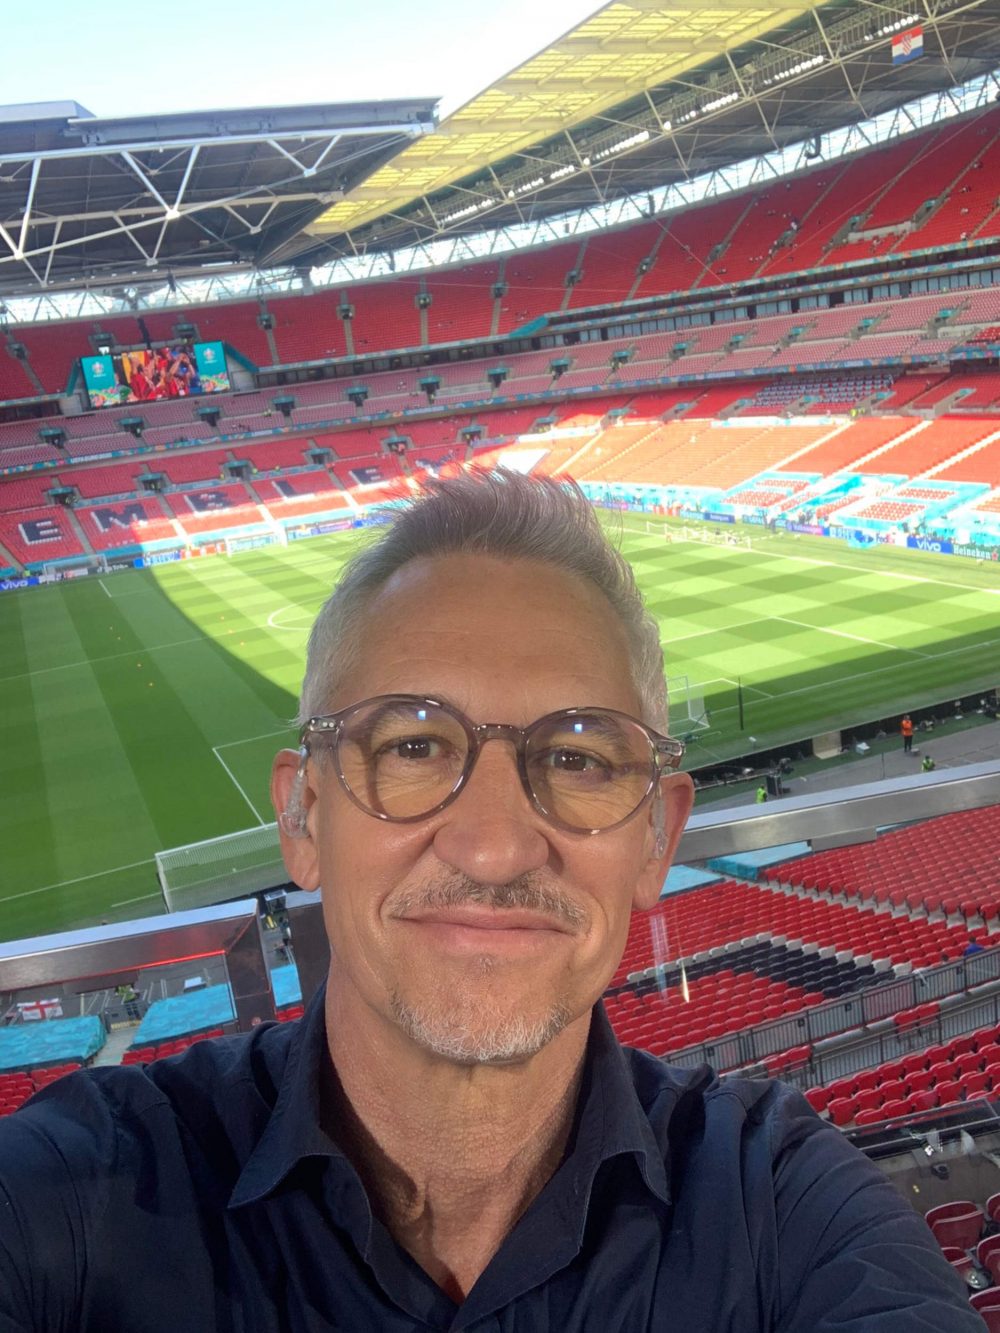 The face of Walkers at Wembley -Sports News UK